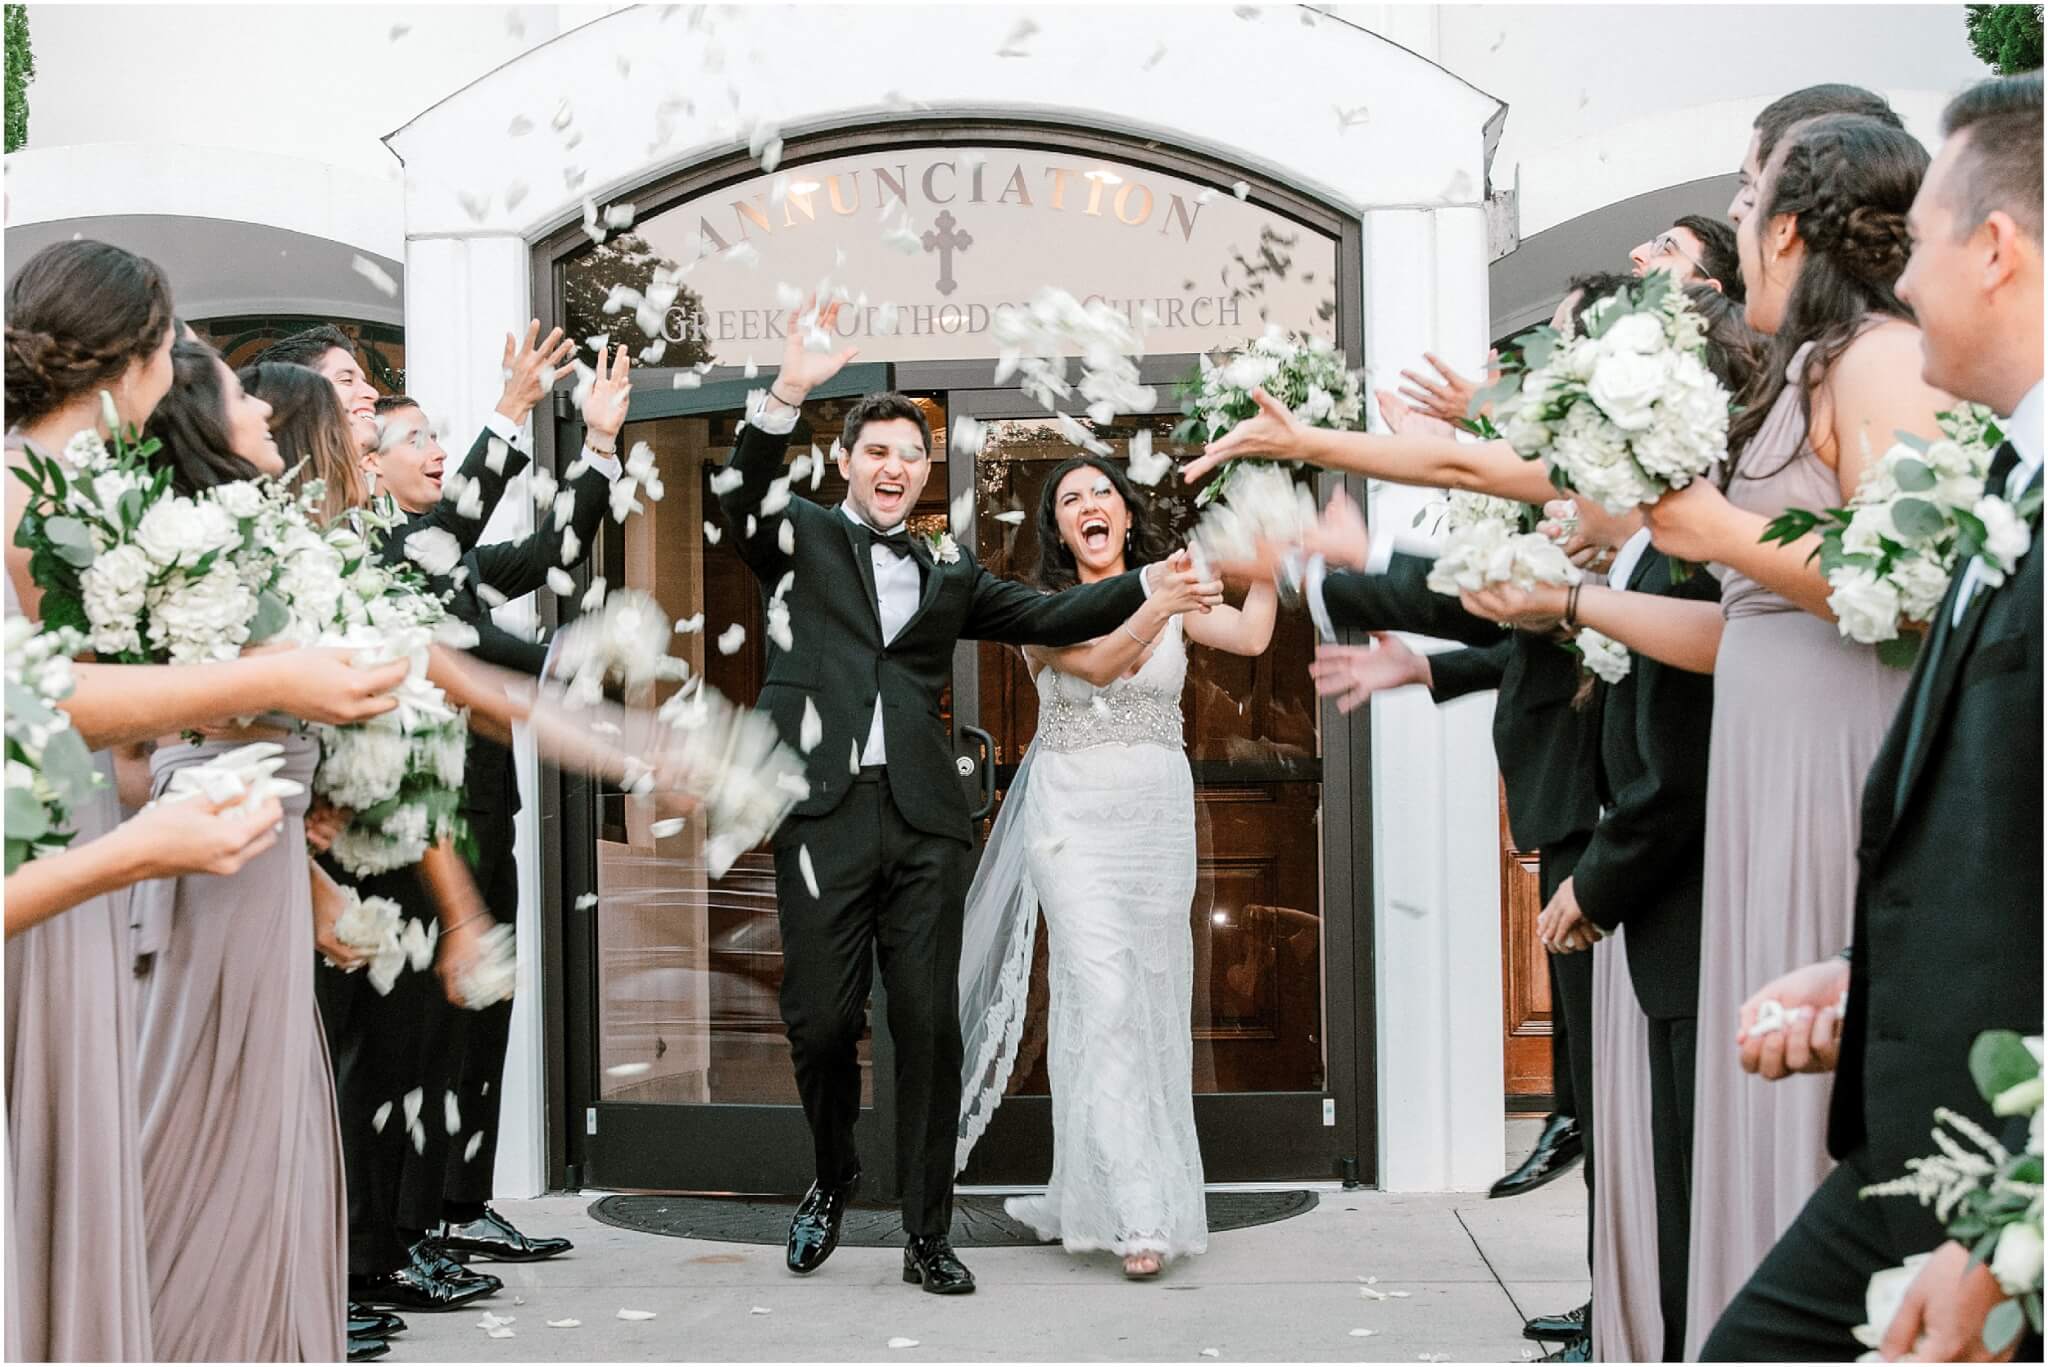 Bridal party throwing confetti at newly married couple